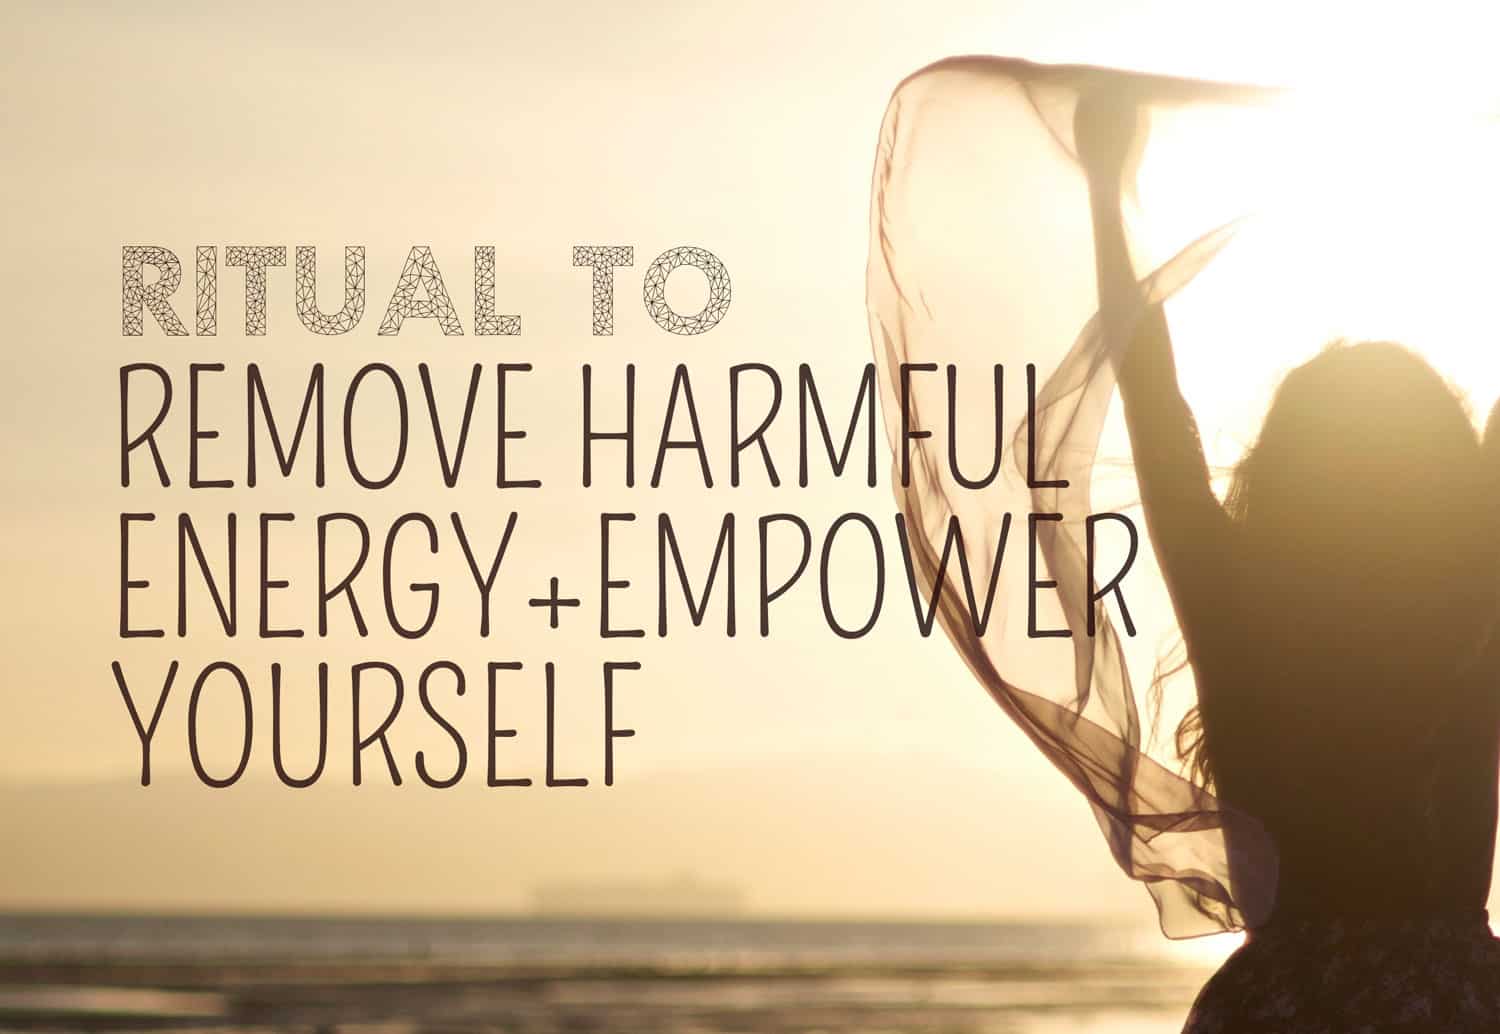 Ritual to Remove Negativity and Empower Yourself